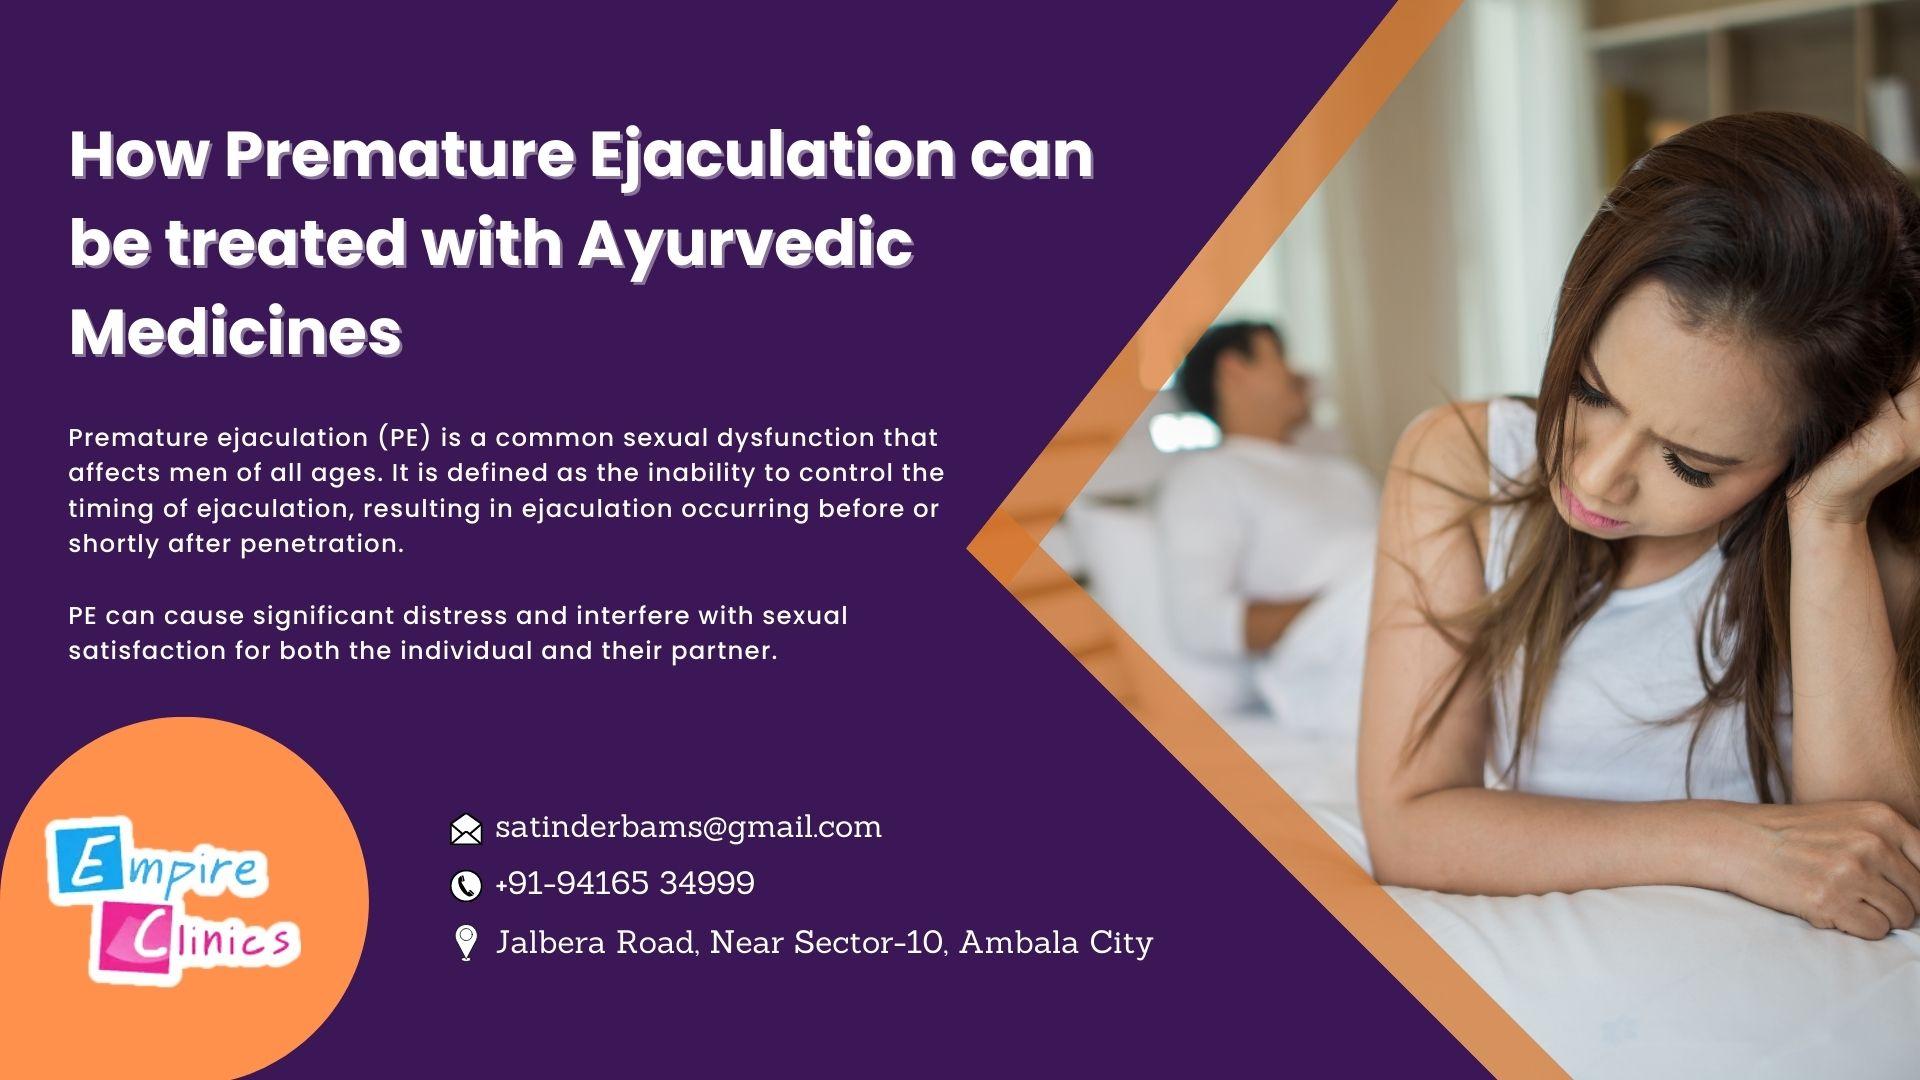 How Premature Ejaculation can be treated with Ayurvedic Medicines?